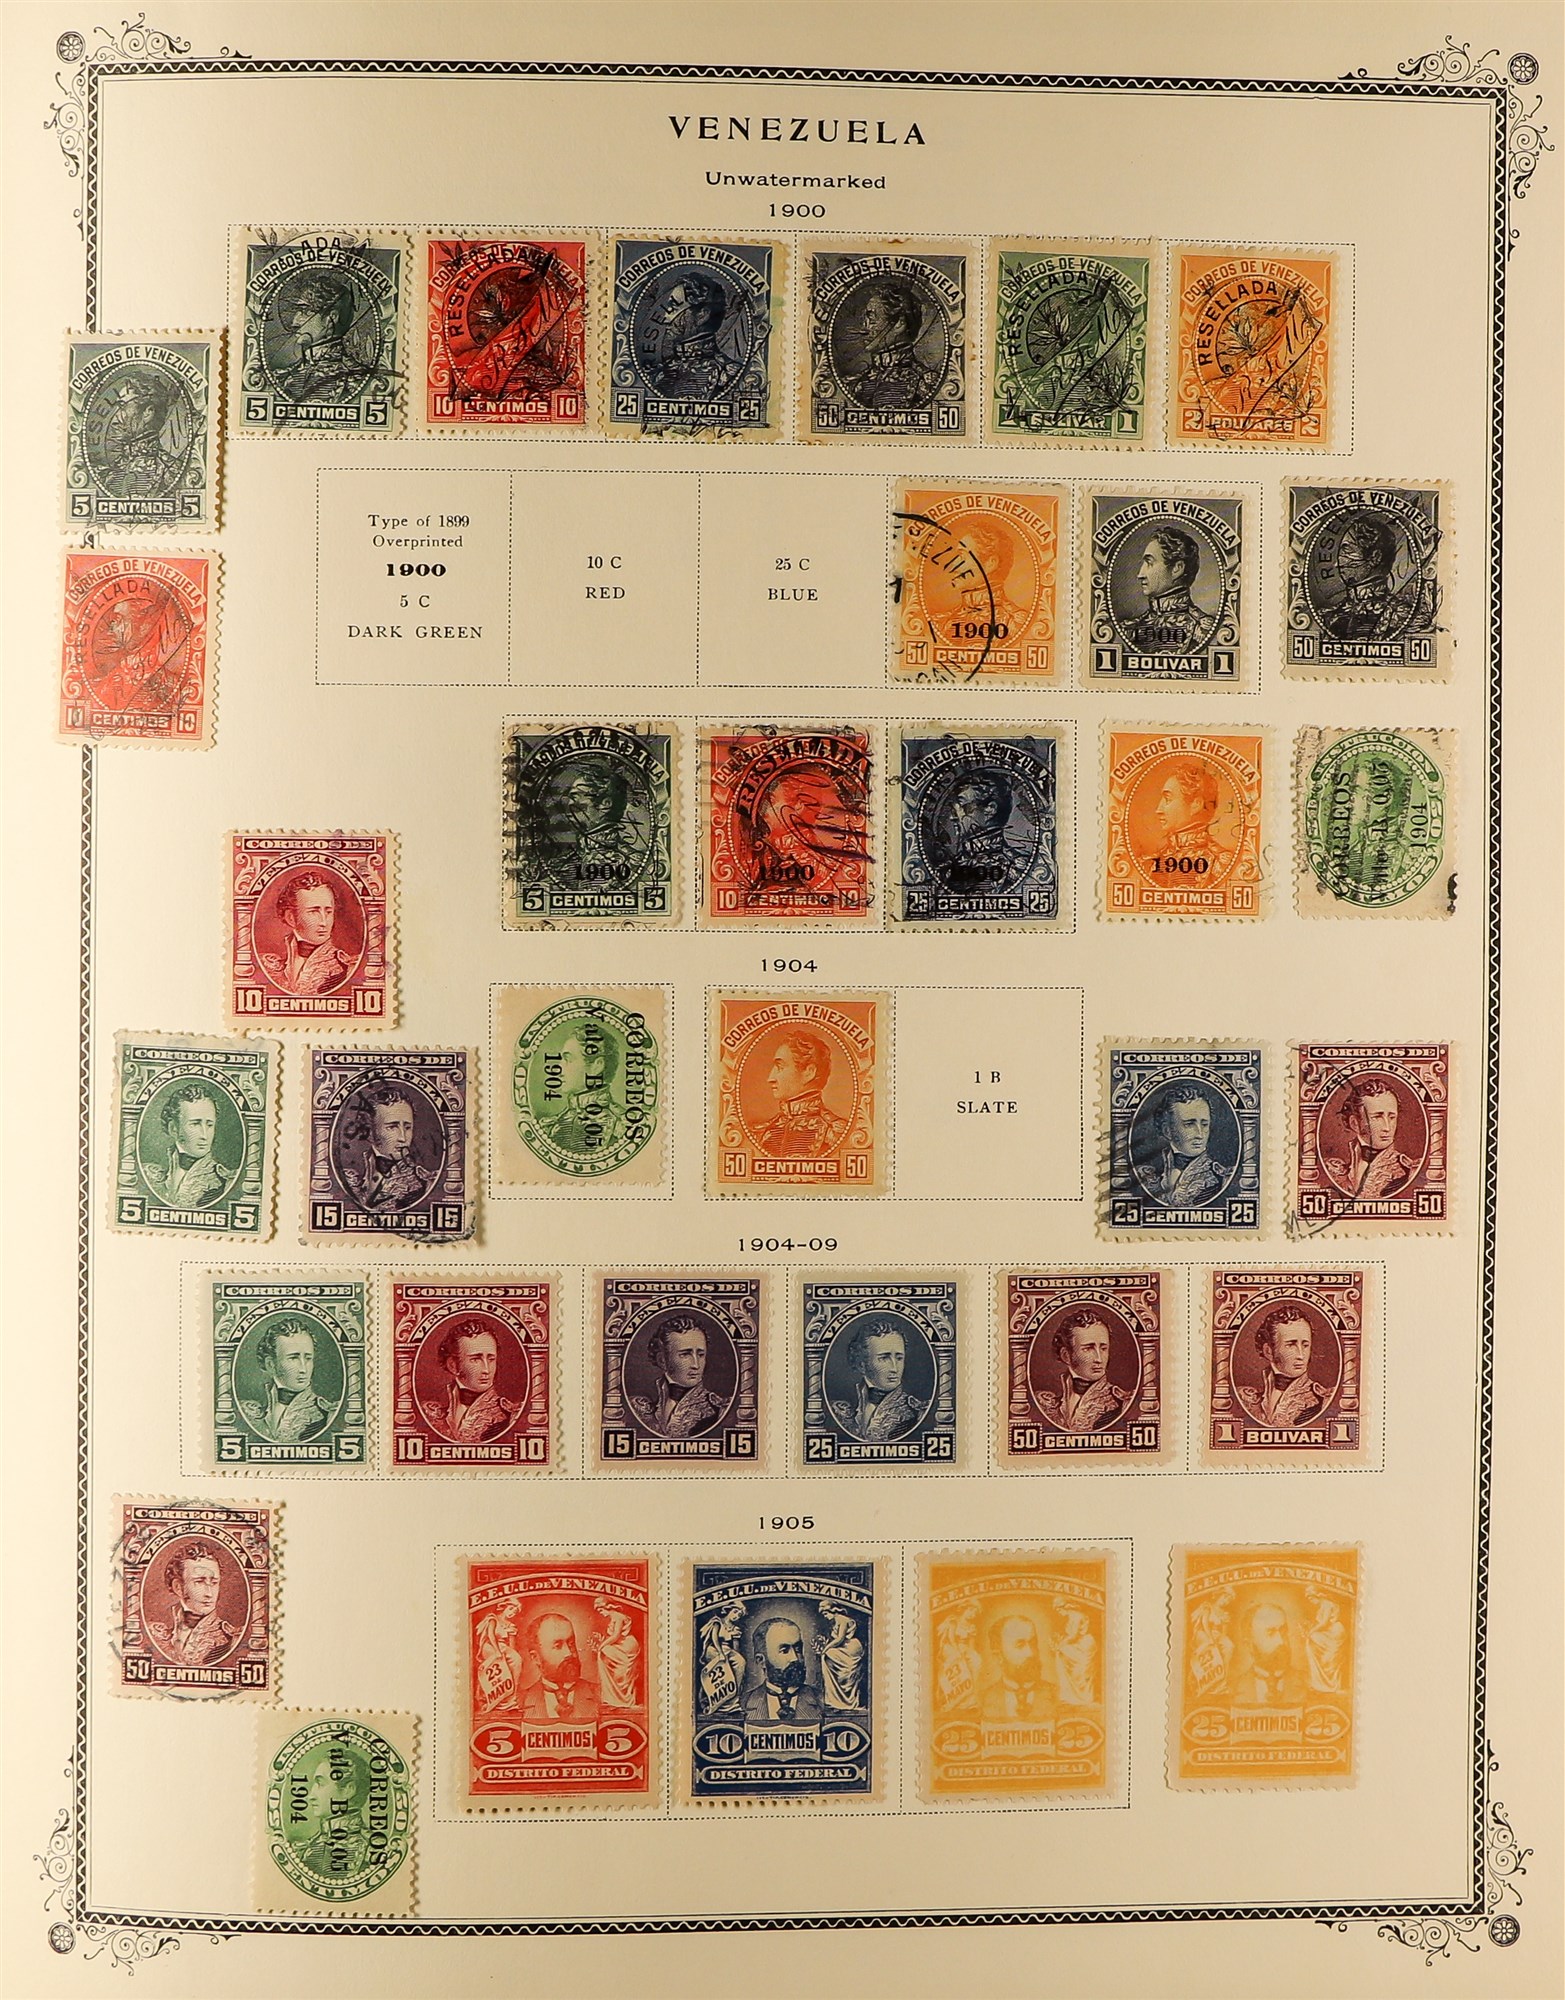 VENEZUELA 1859 - 1976 COLLECTION of 1500+ mint & used stamps in album, note 1859-62 Coat of Arms, - Image 9 of 19